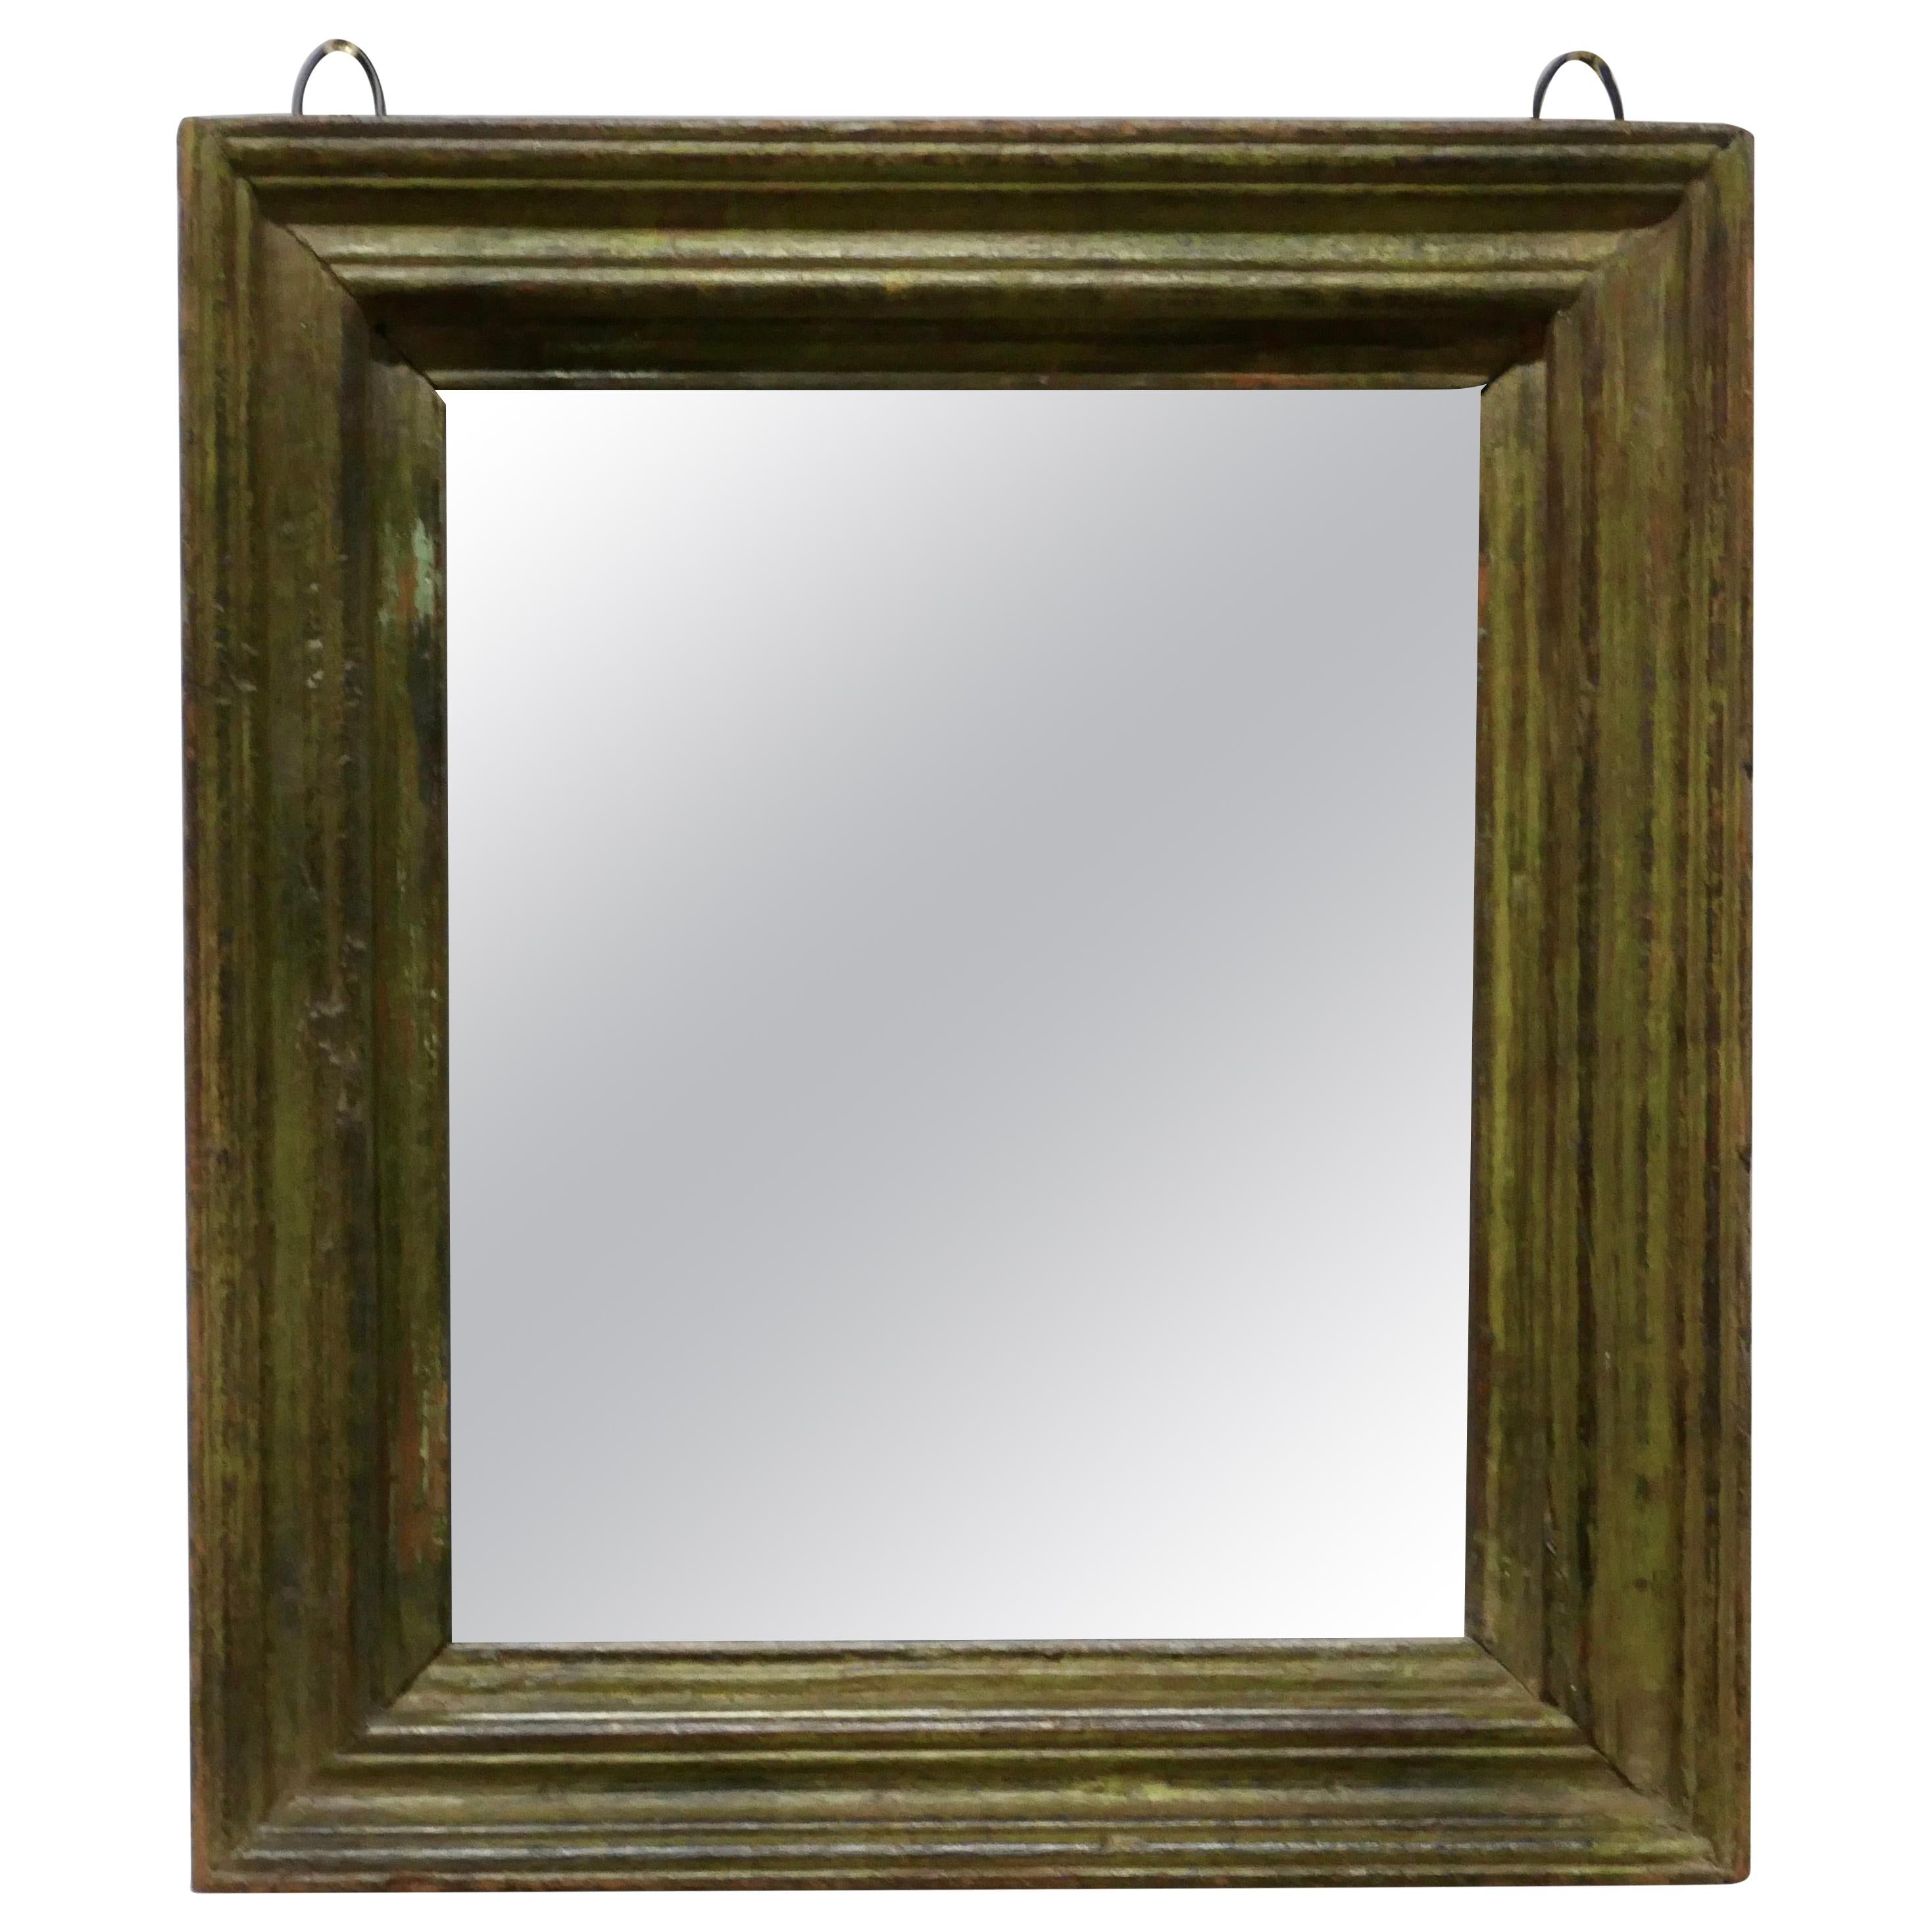 19th Century French Wall Mirror with an Old Painted Frame